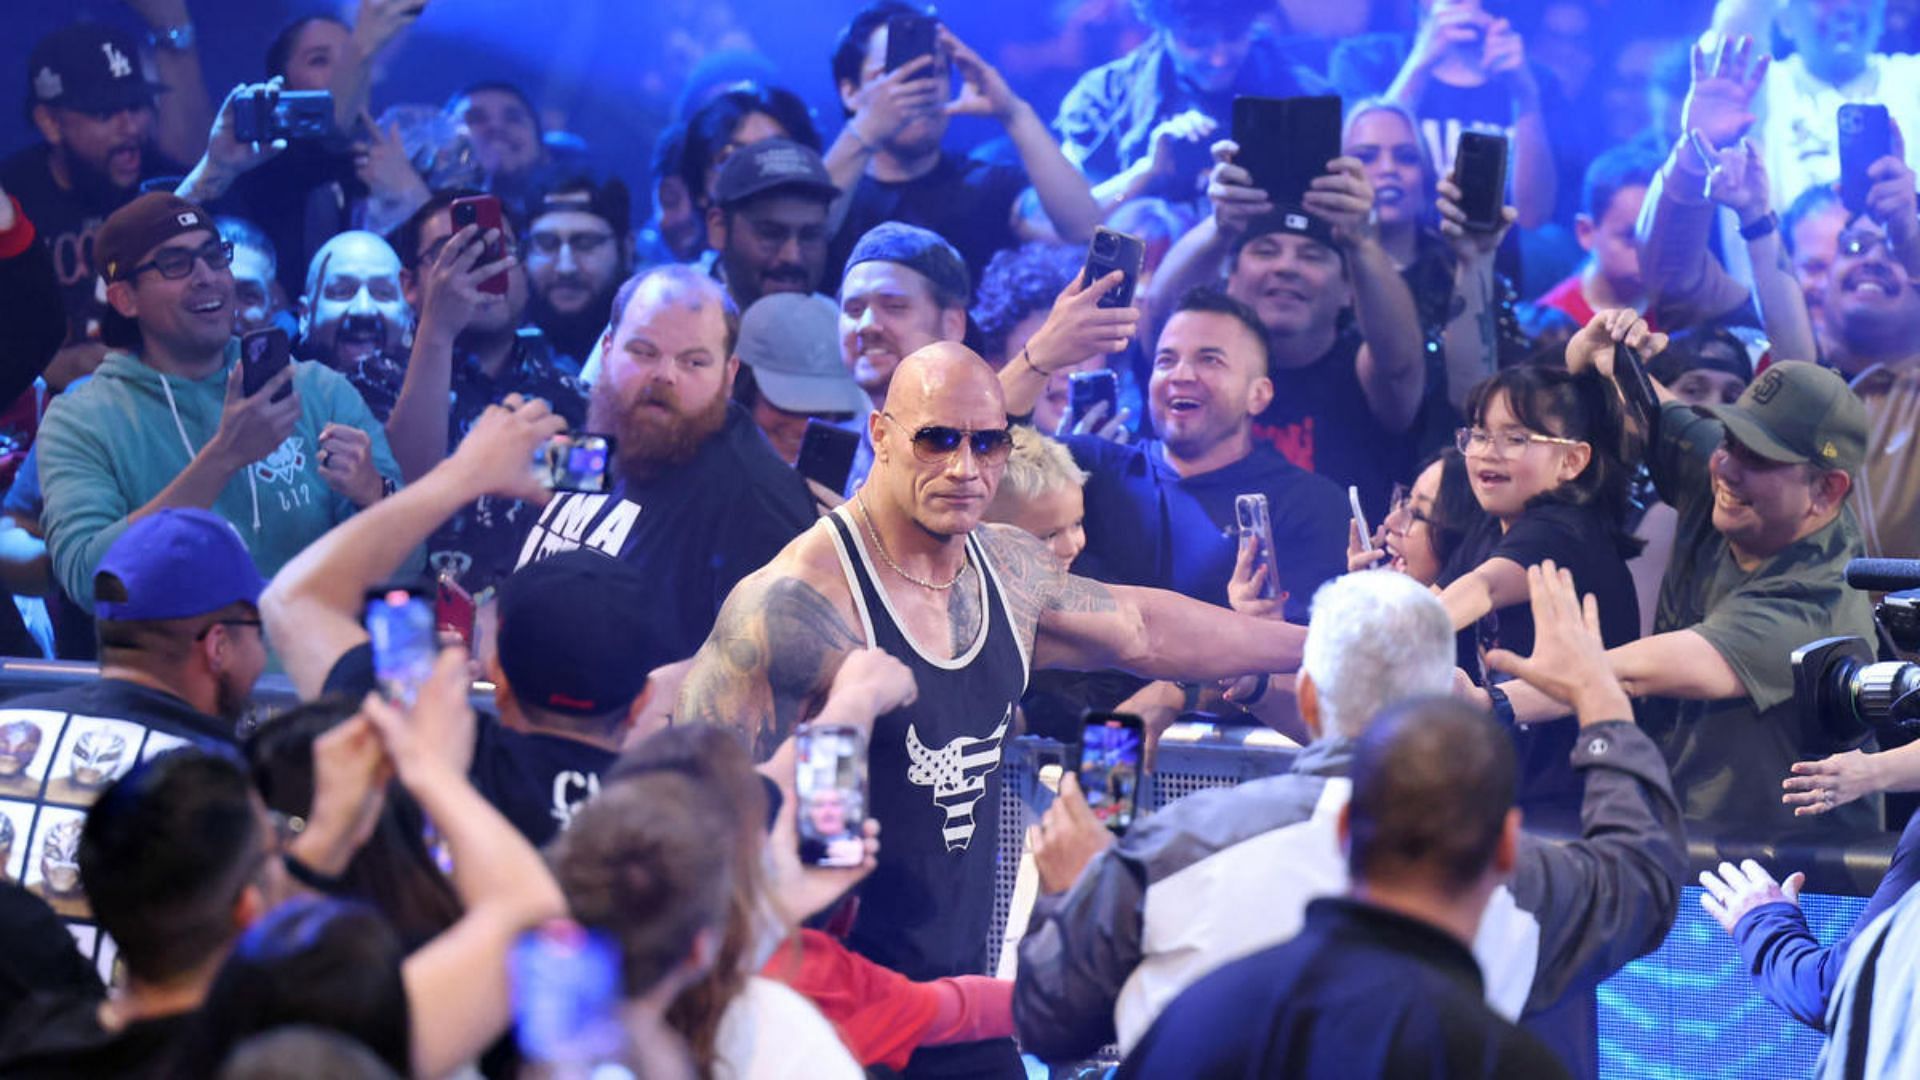 The Rock returned to WWE on RAW Day 1